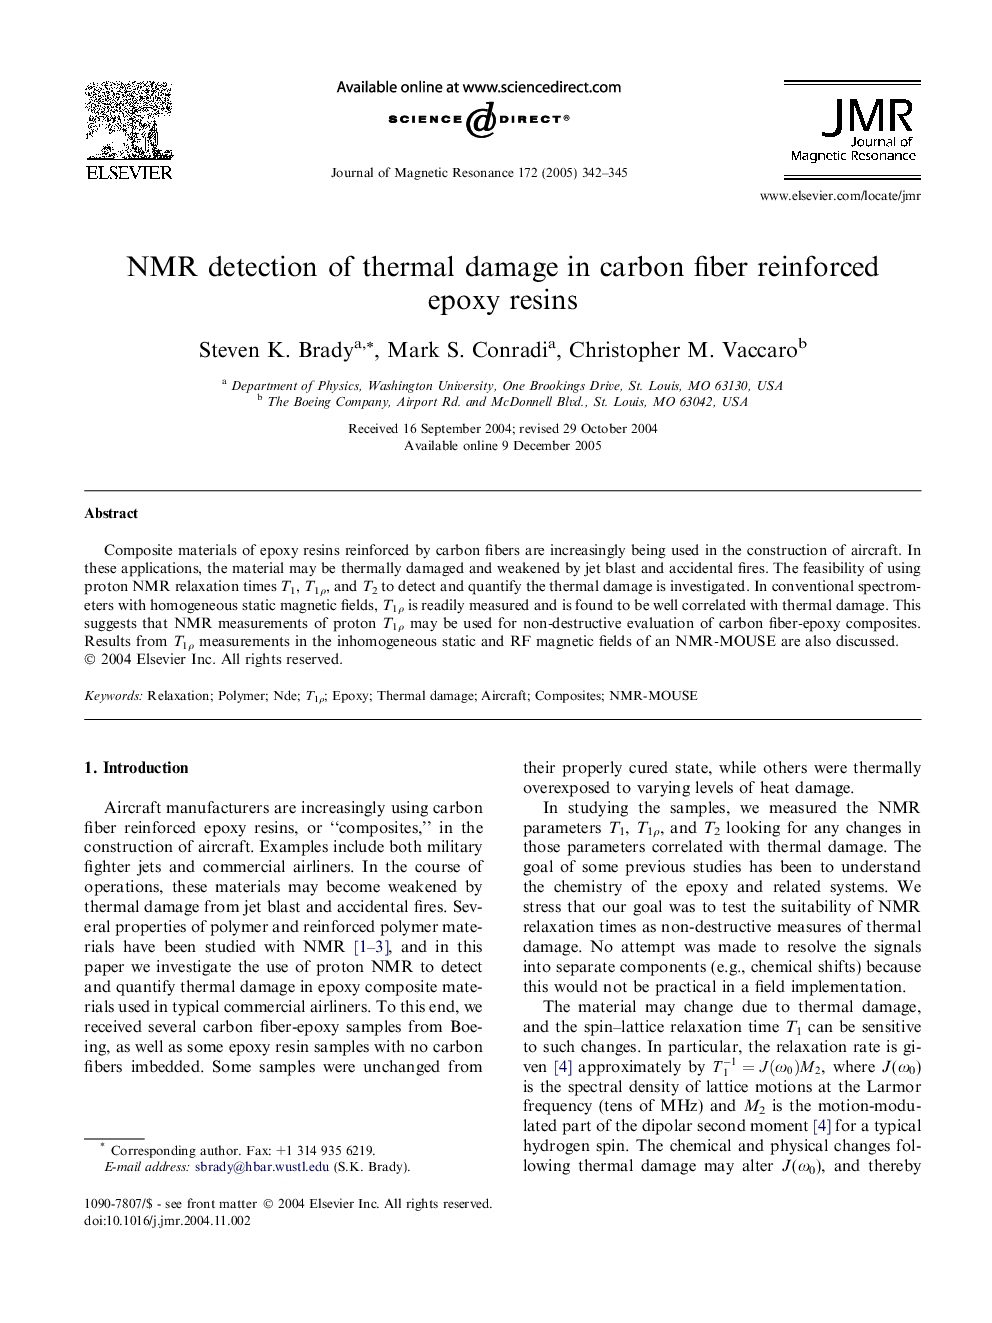 NMR detection of thermal damage in carbon fiber reinforced epoxy resins